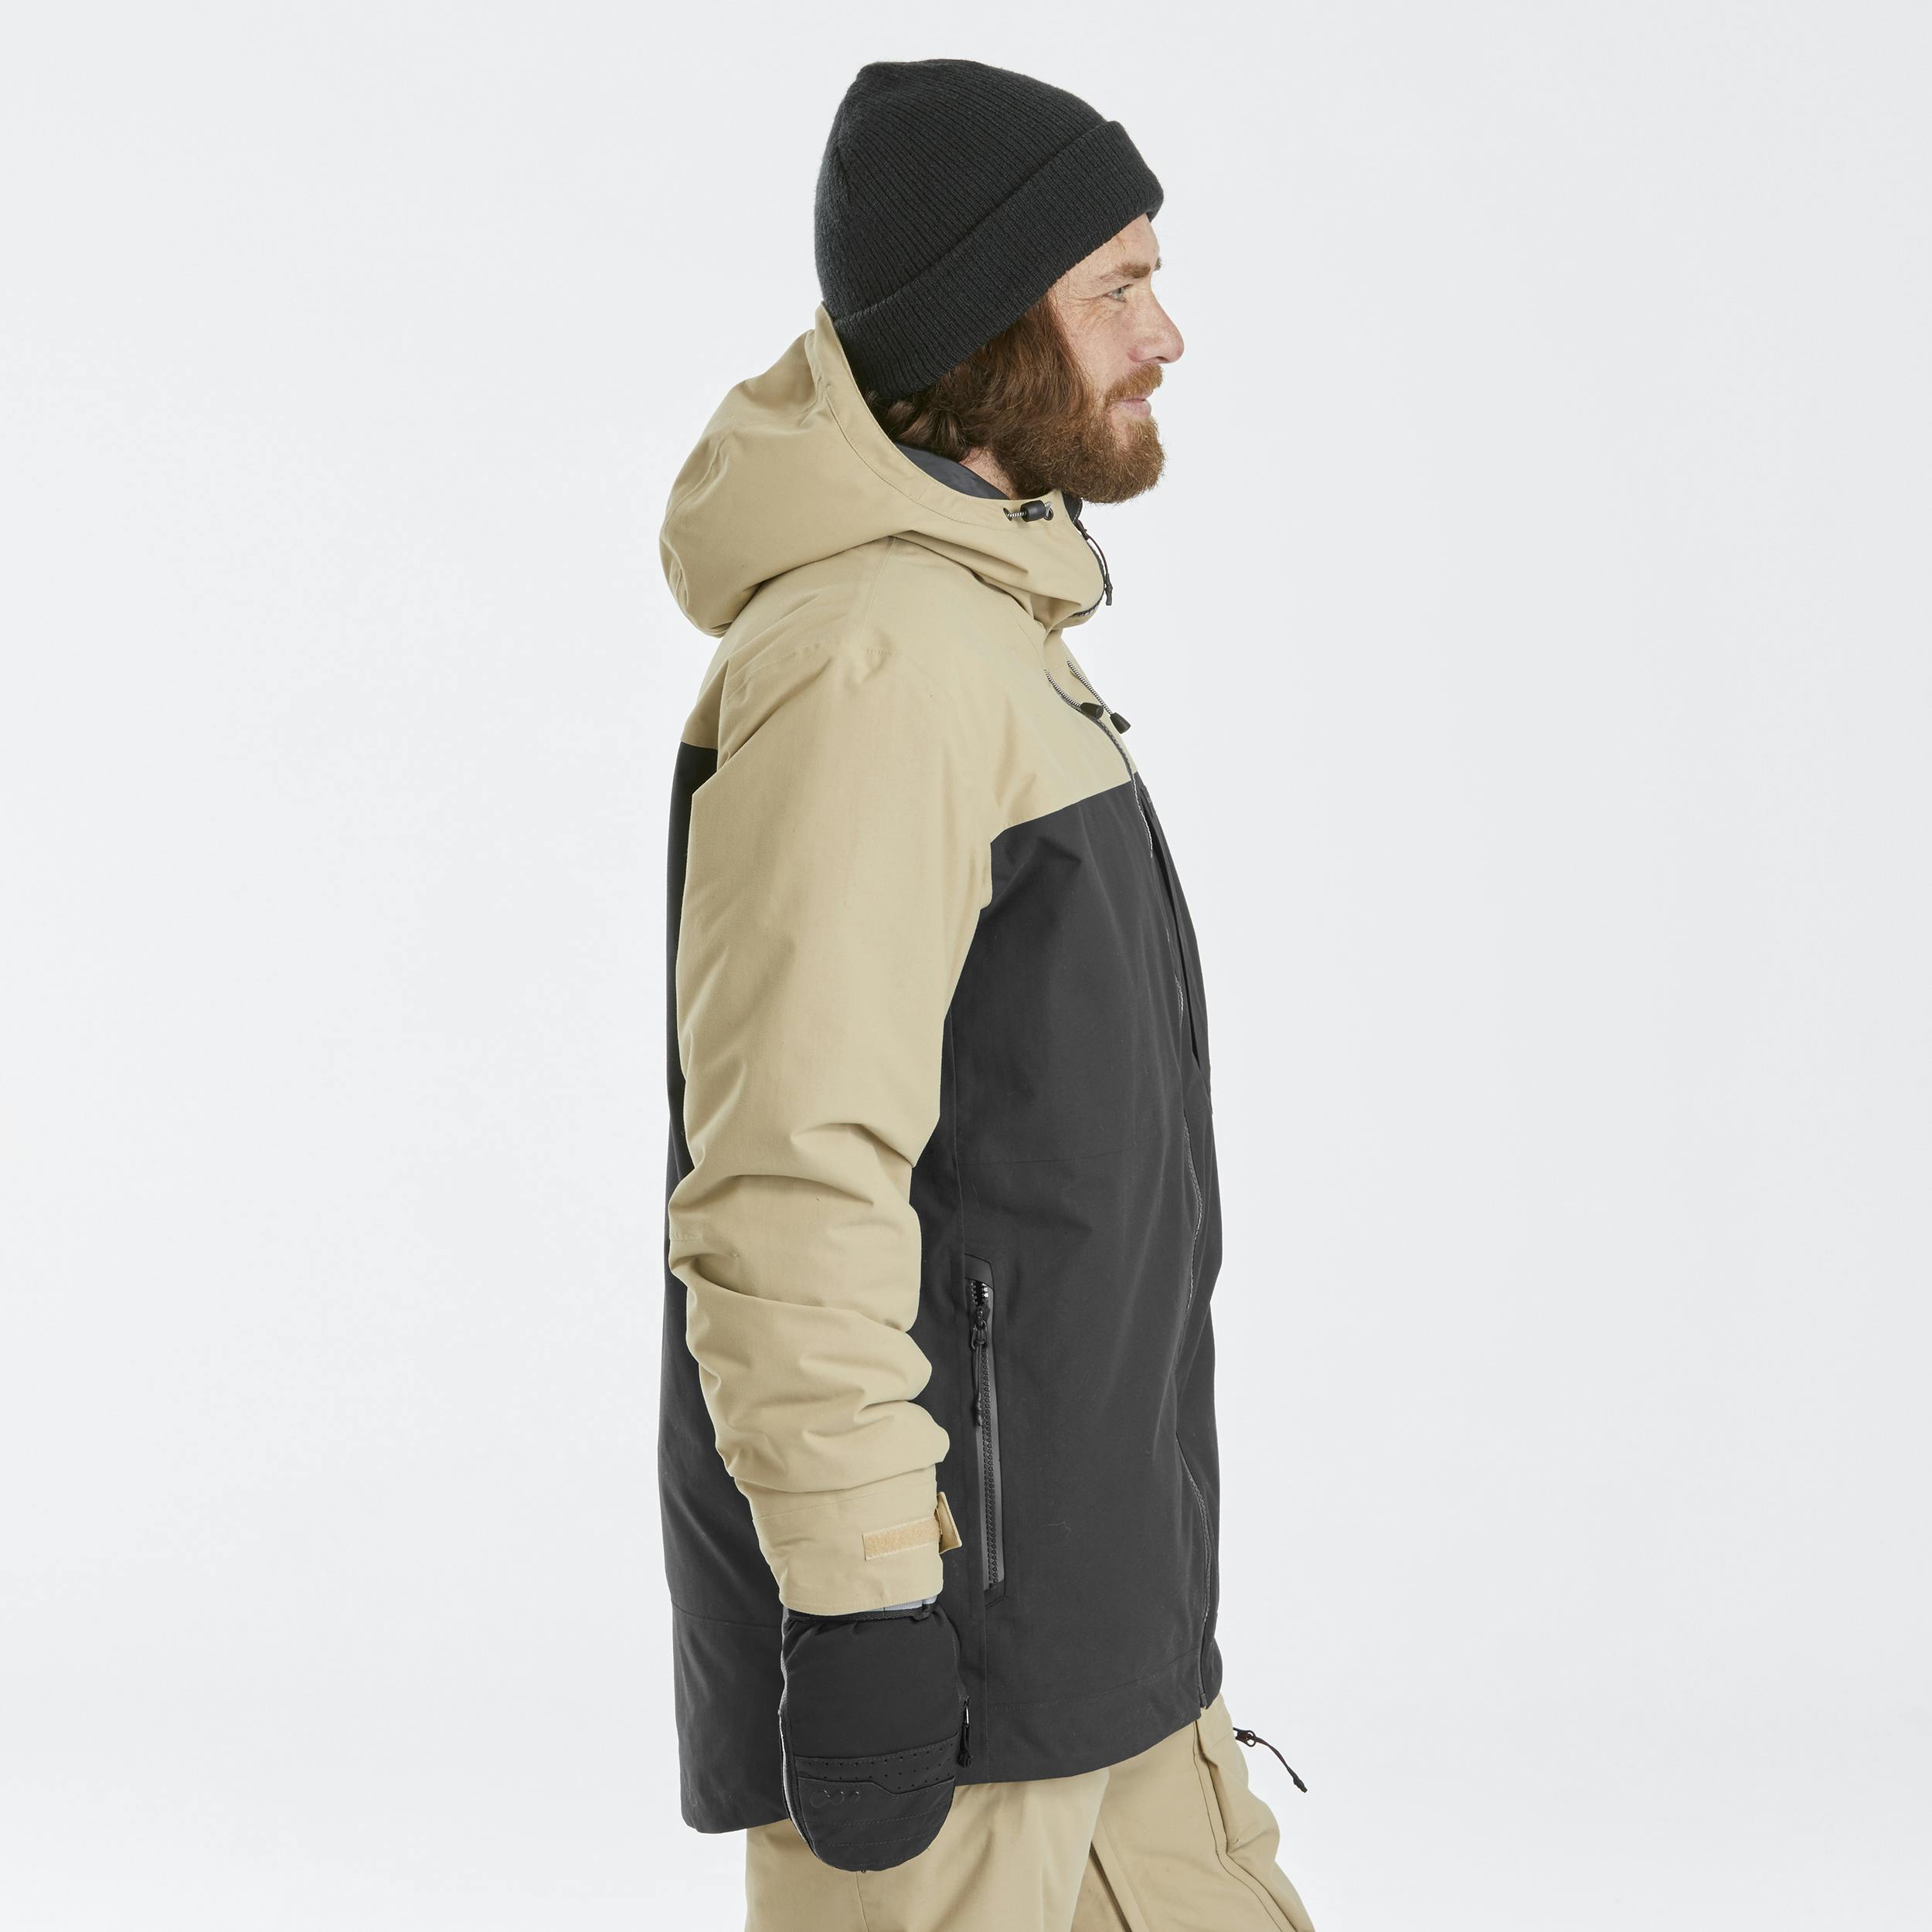 Decathlon Men's SNB 500 Insulated Jacket Curated.com